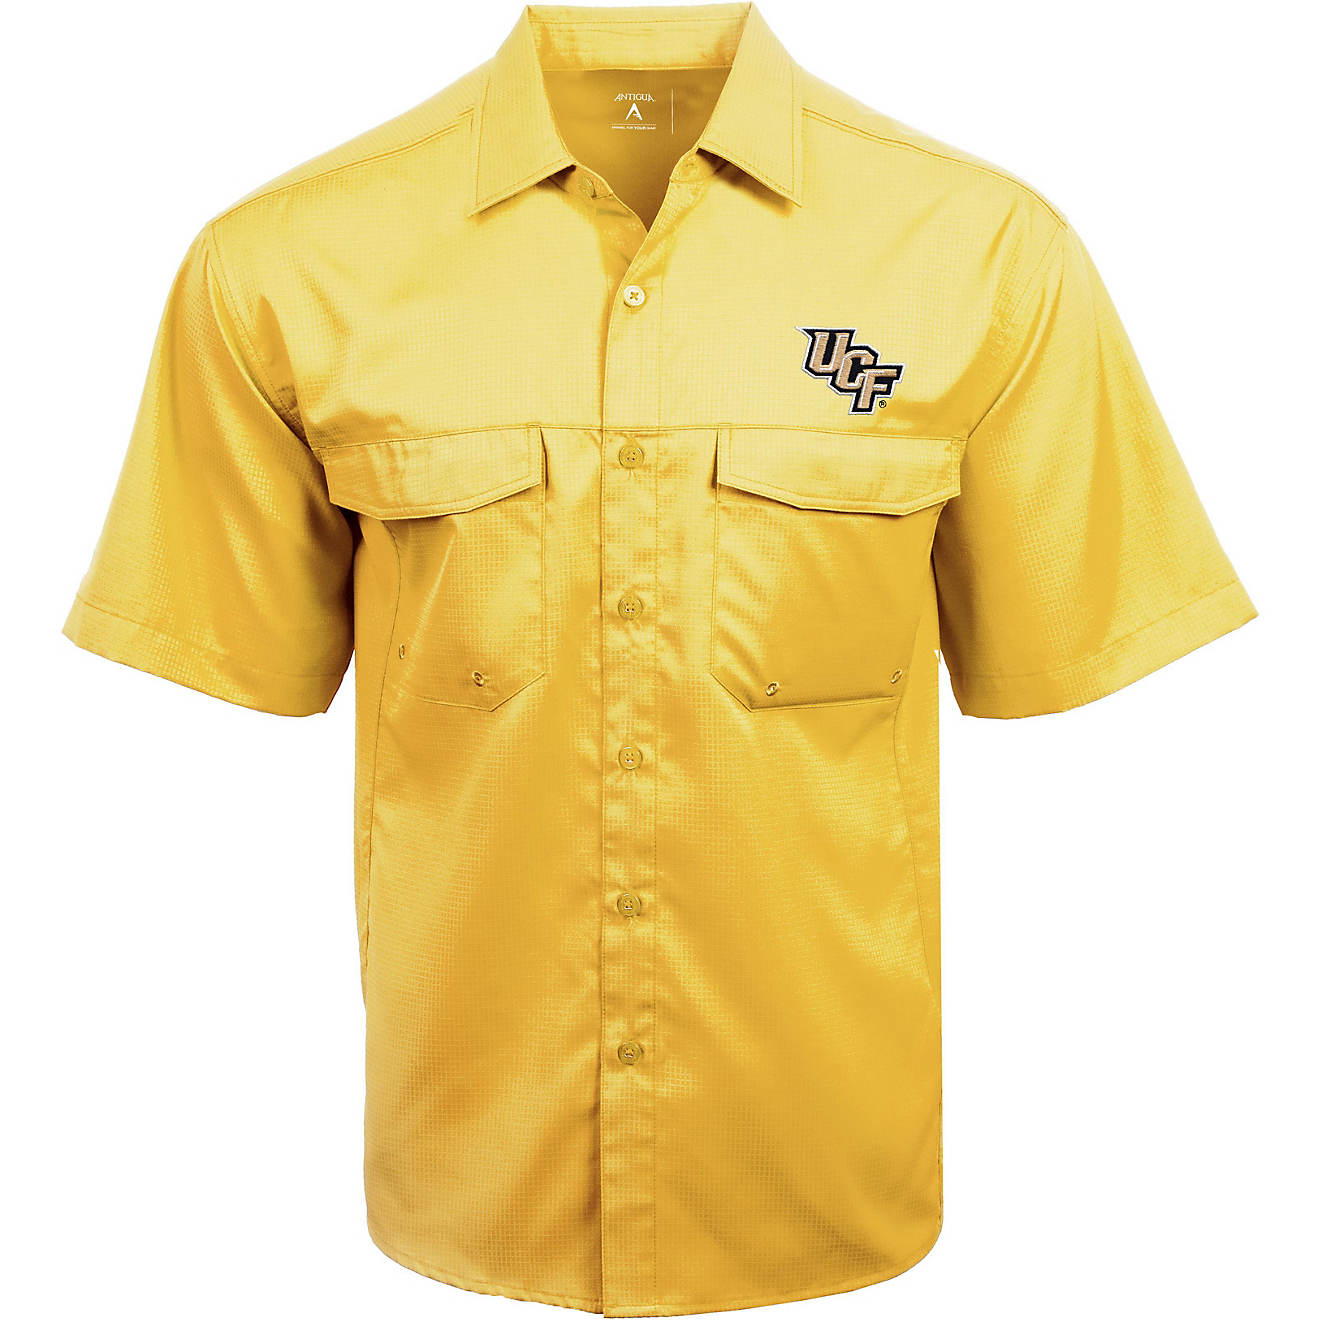 Antigua Men's University of Central Florida Game Day Woven Fishing Shirt                                                         - view number 1